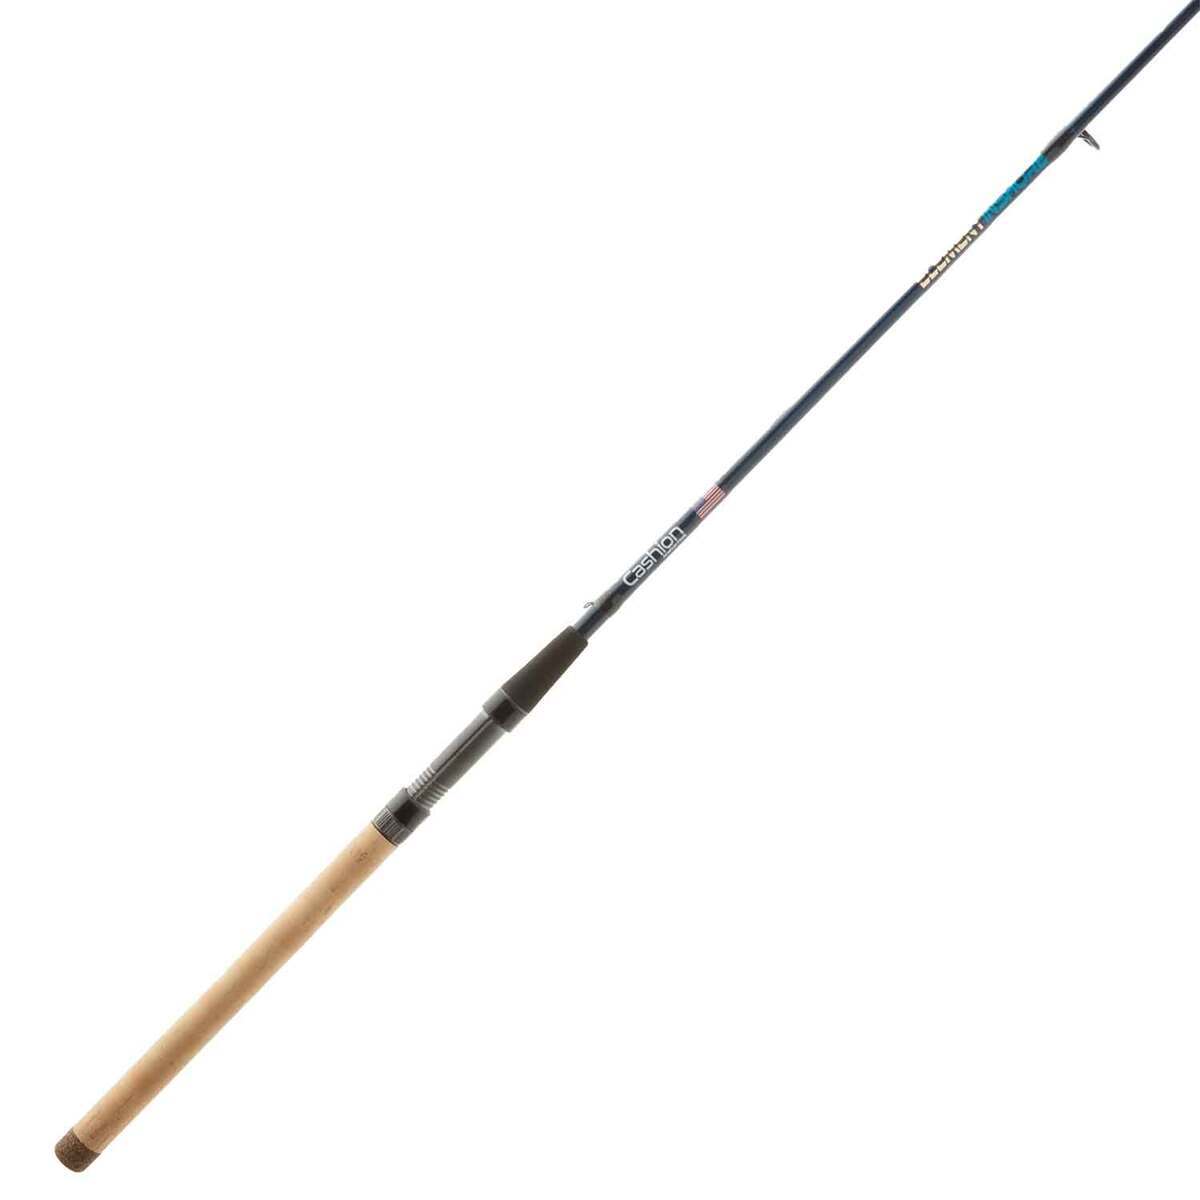 Cashion Core cUL8417s 7'0 Ultra Light - Used Spinning Rod - Excellent  Condition - American Legacy Fishing, G Loomis Superstore